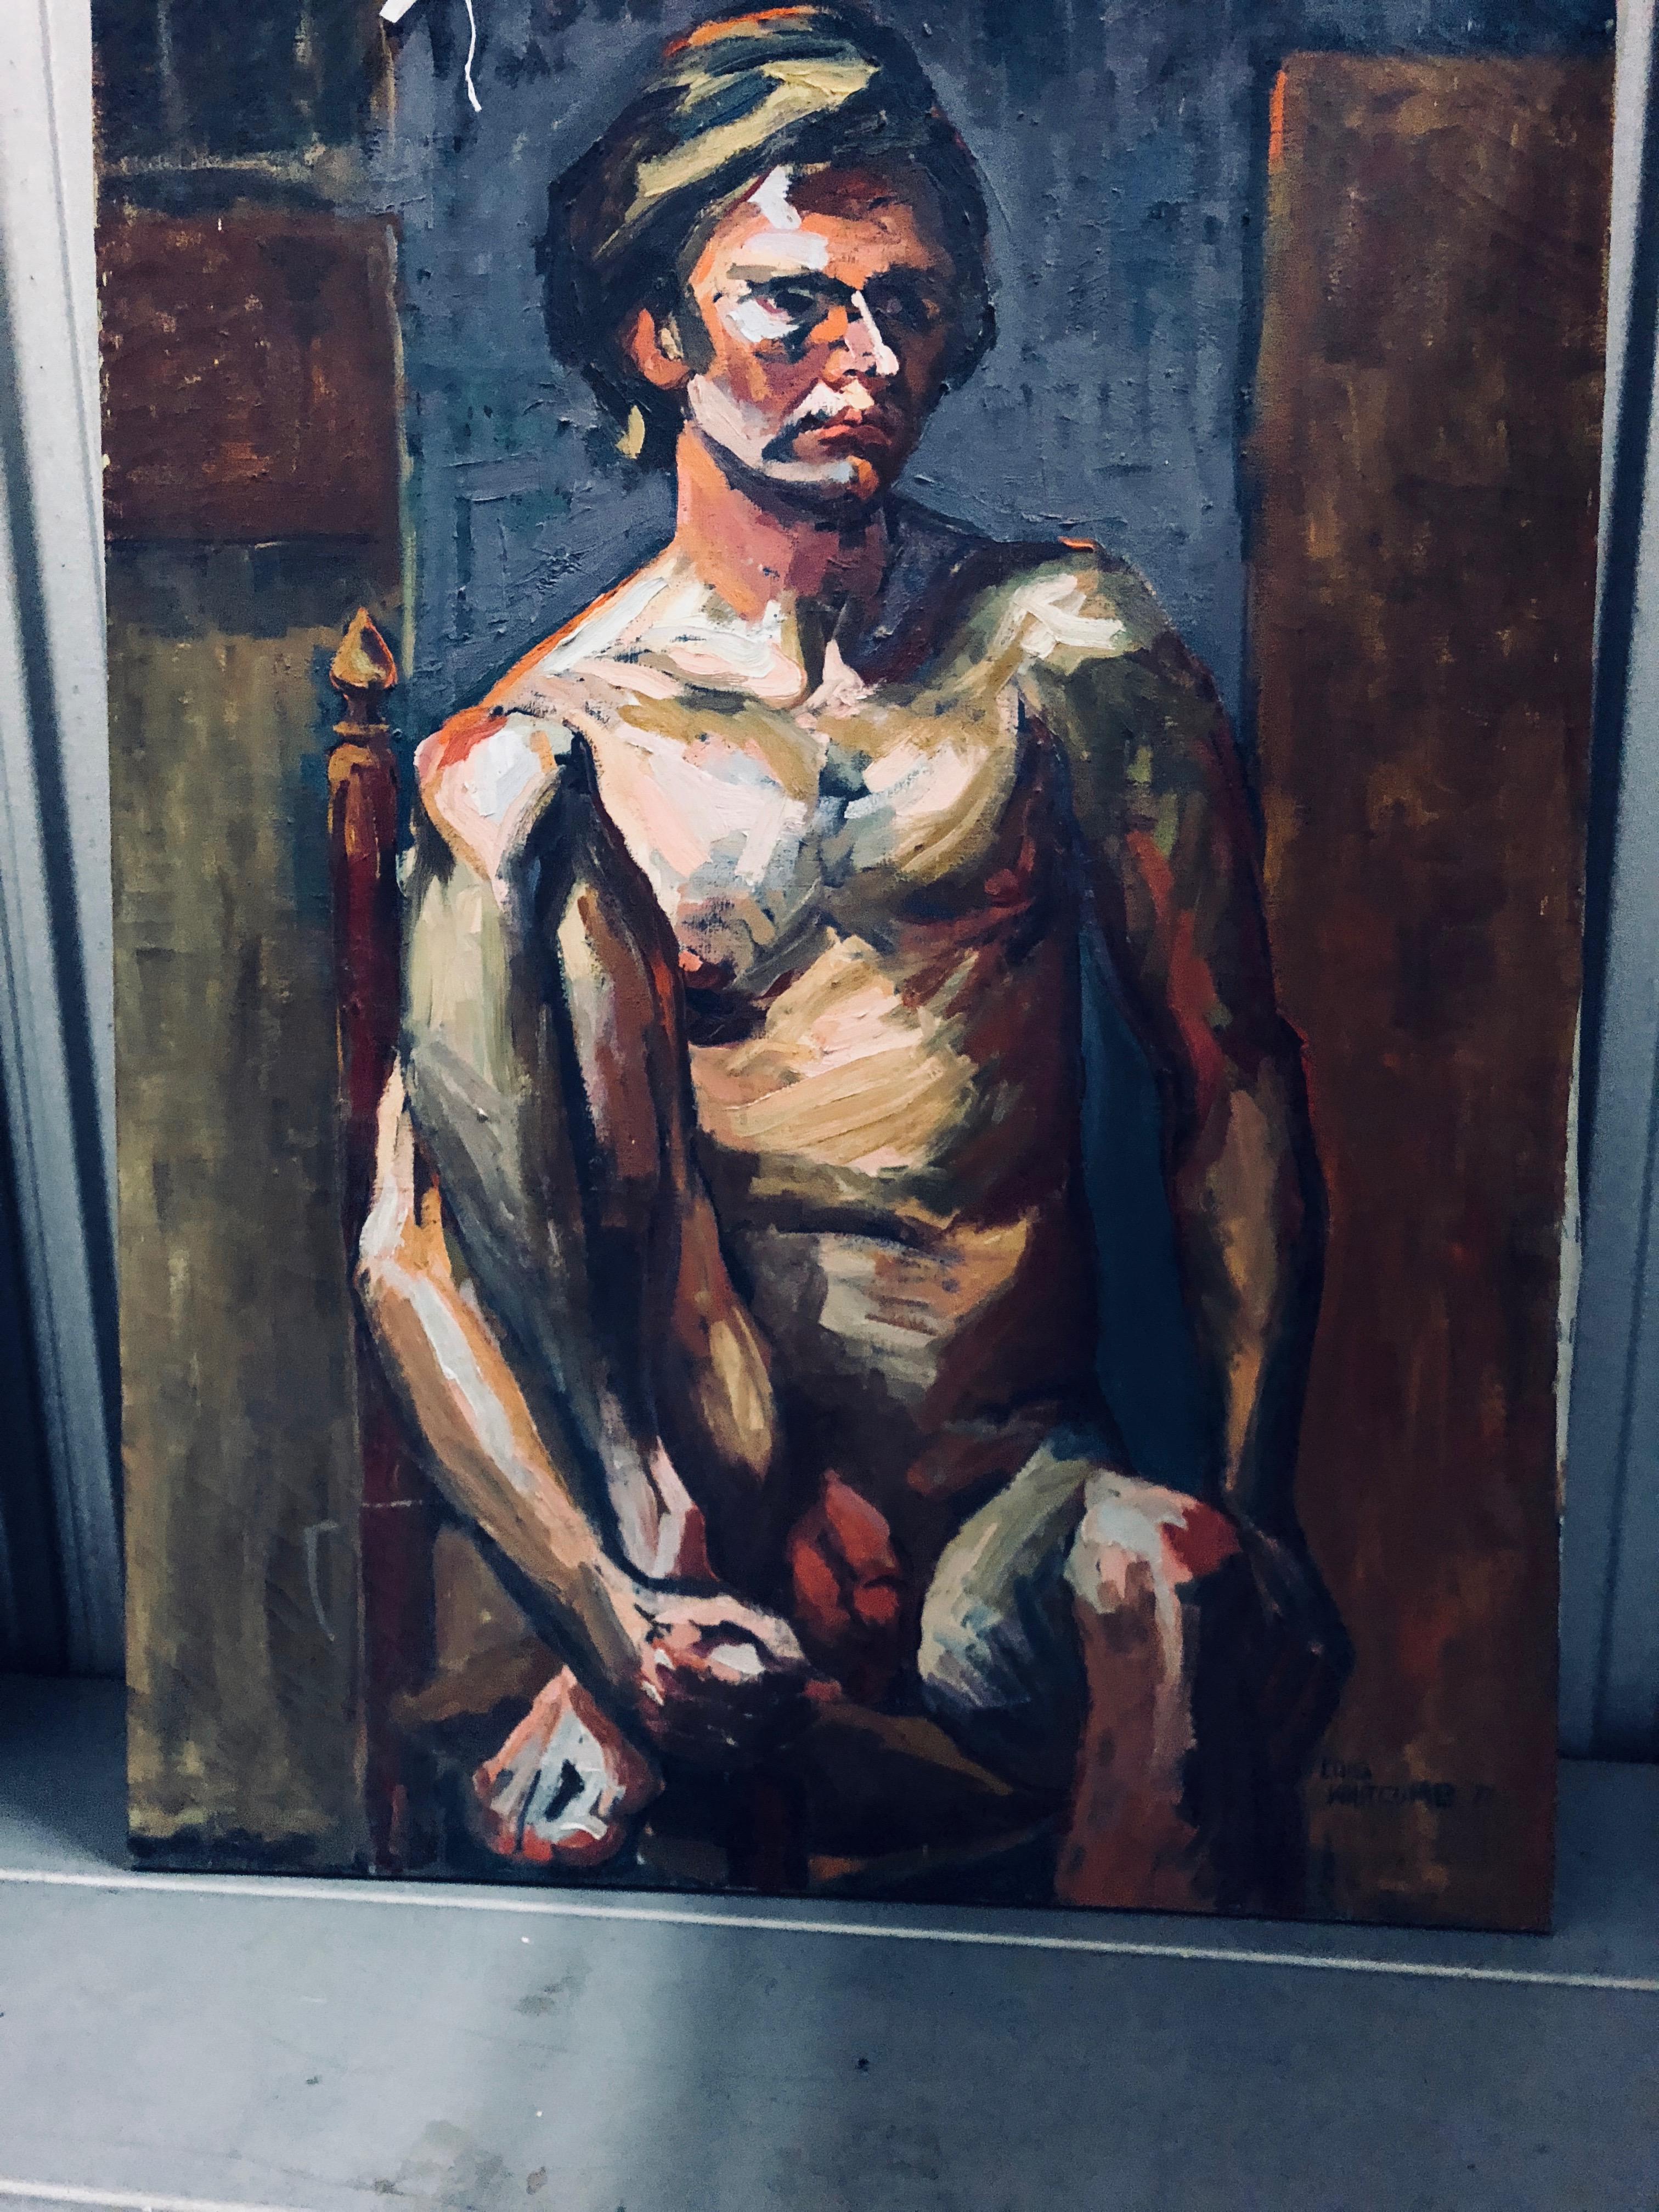 American Midcentury Abstract Expressionist Male Nude Portrait by Lois Foley Whitcomb